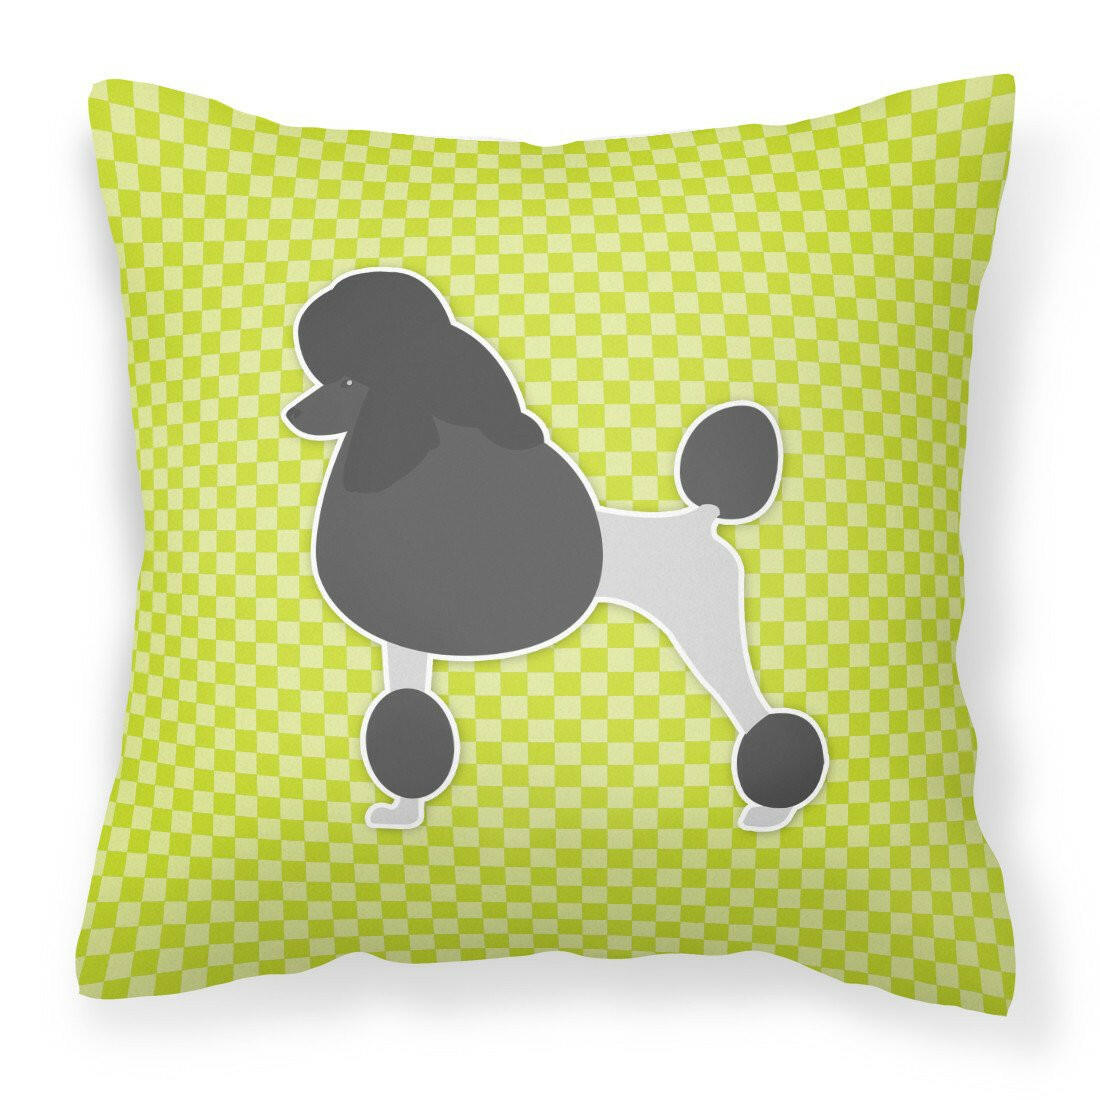 Poodle Checkerboard Green Fabric Decorative Pillow BB3839PW1818 by Caroline's Treasures